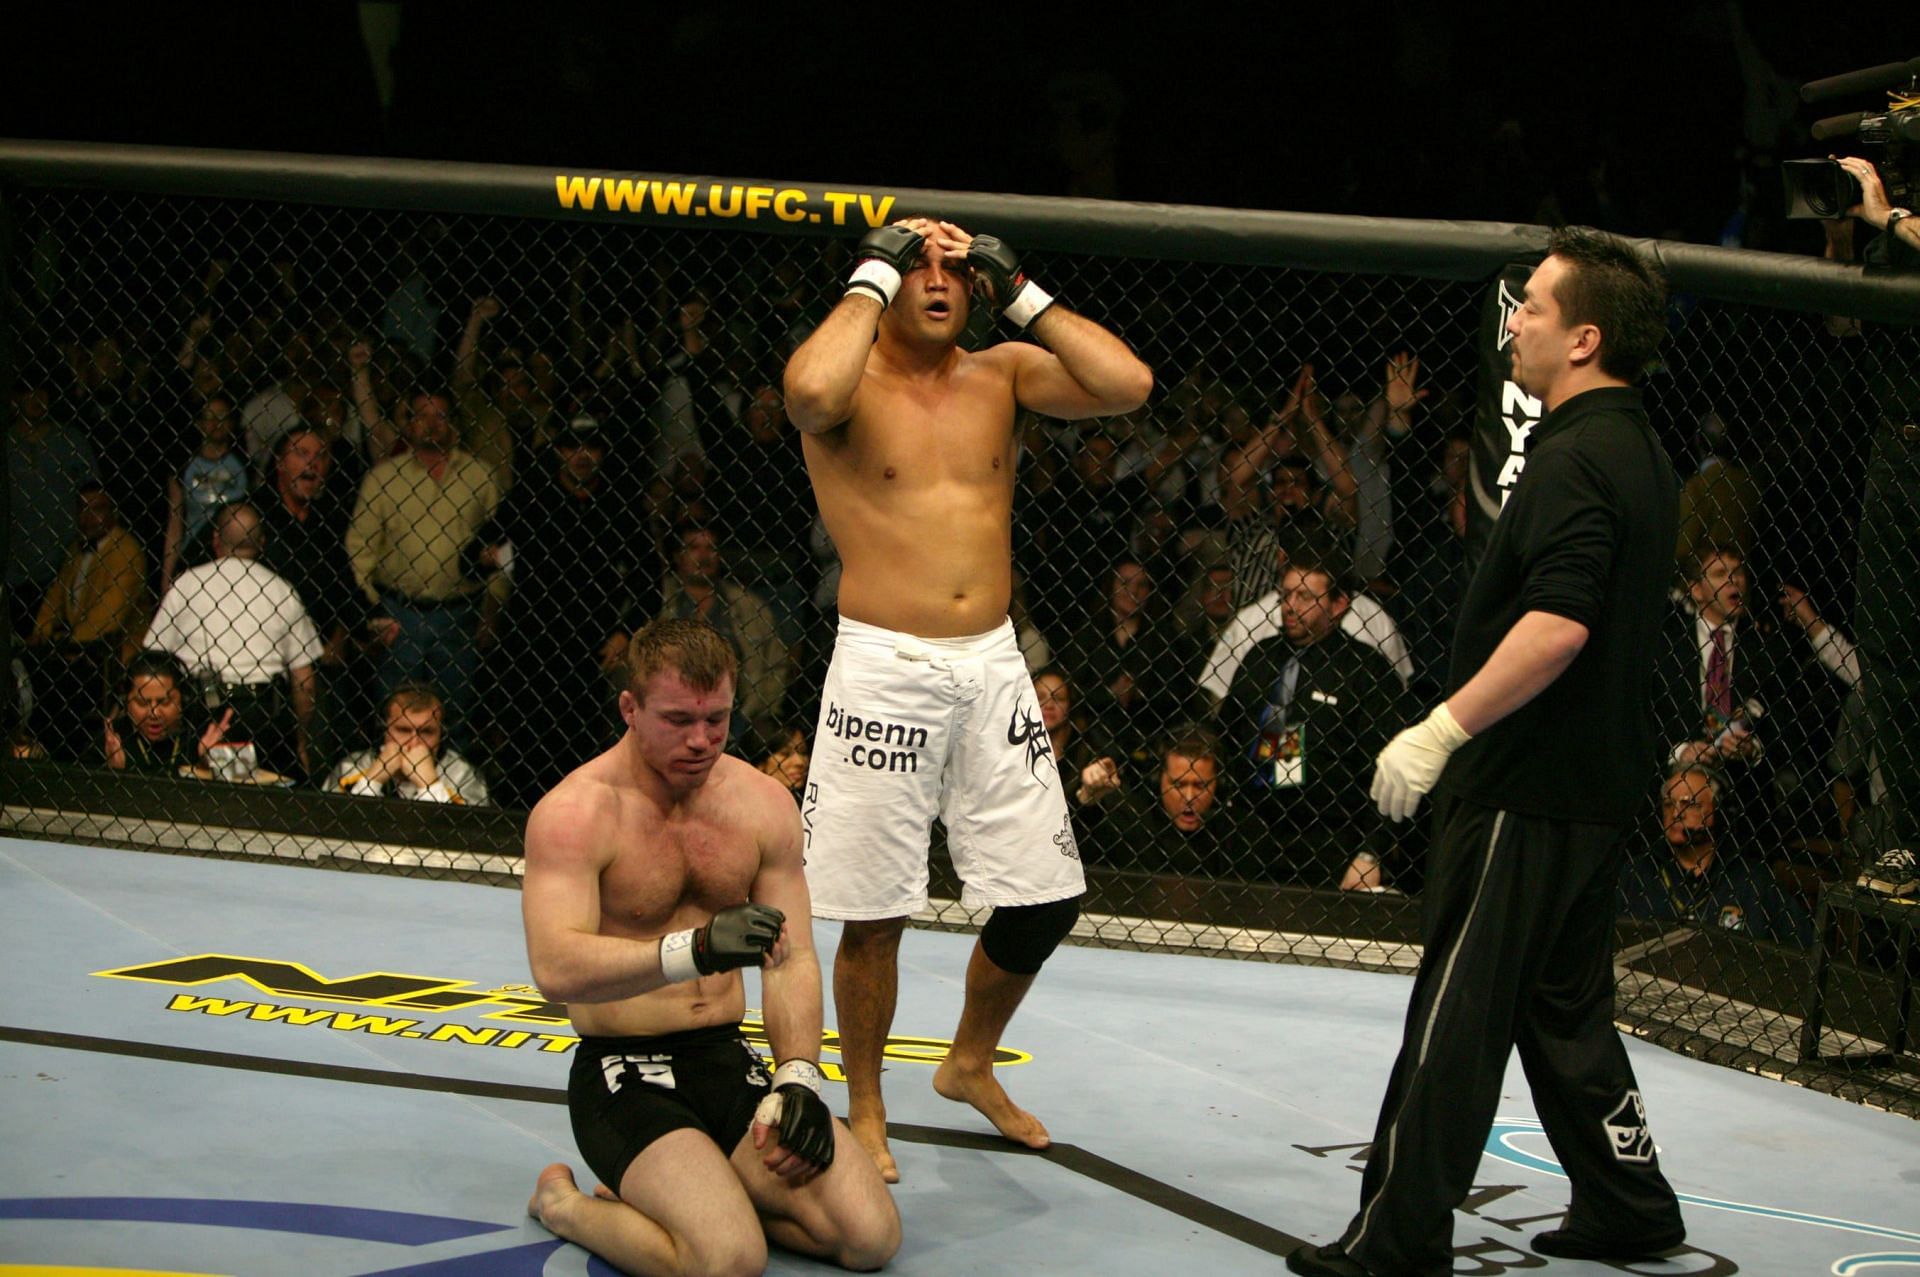 BJ Penn shocked the world when he defeated Matt Hughes for the welterweight title in 2004